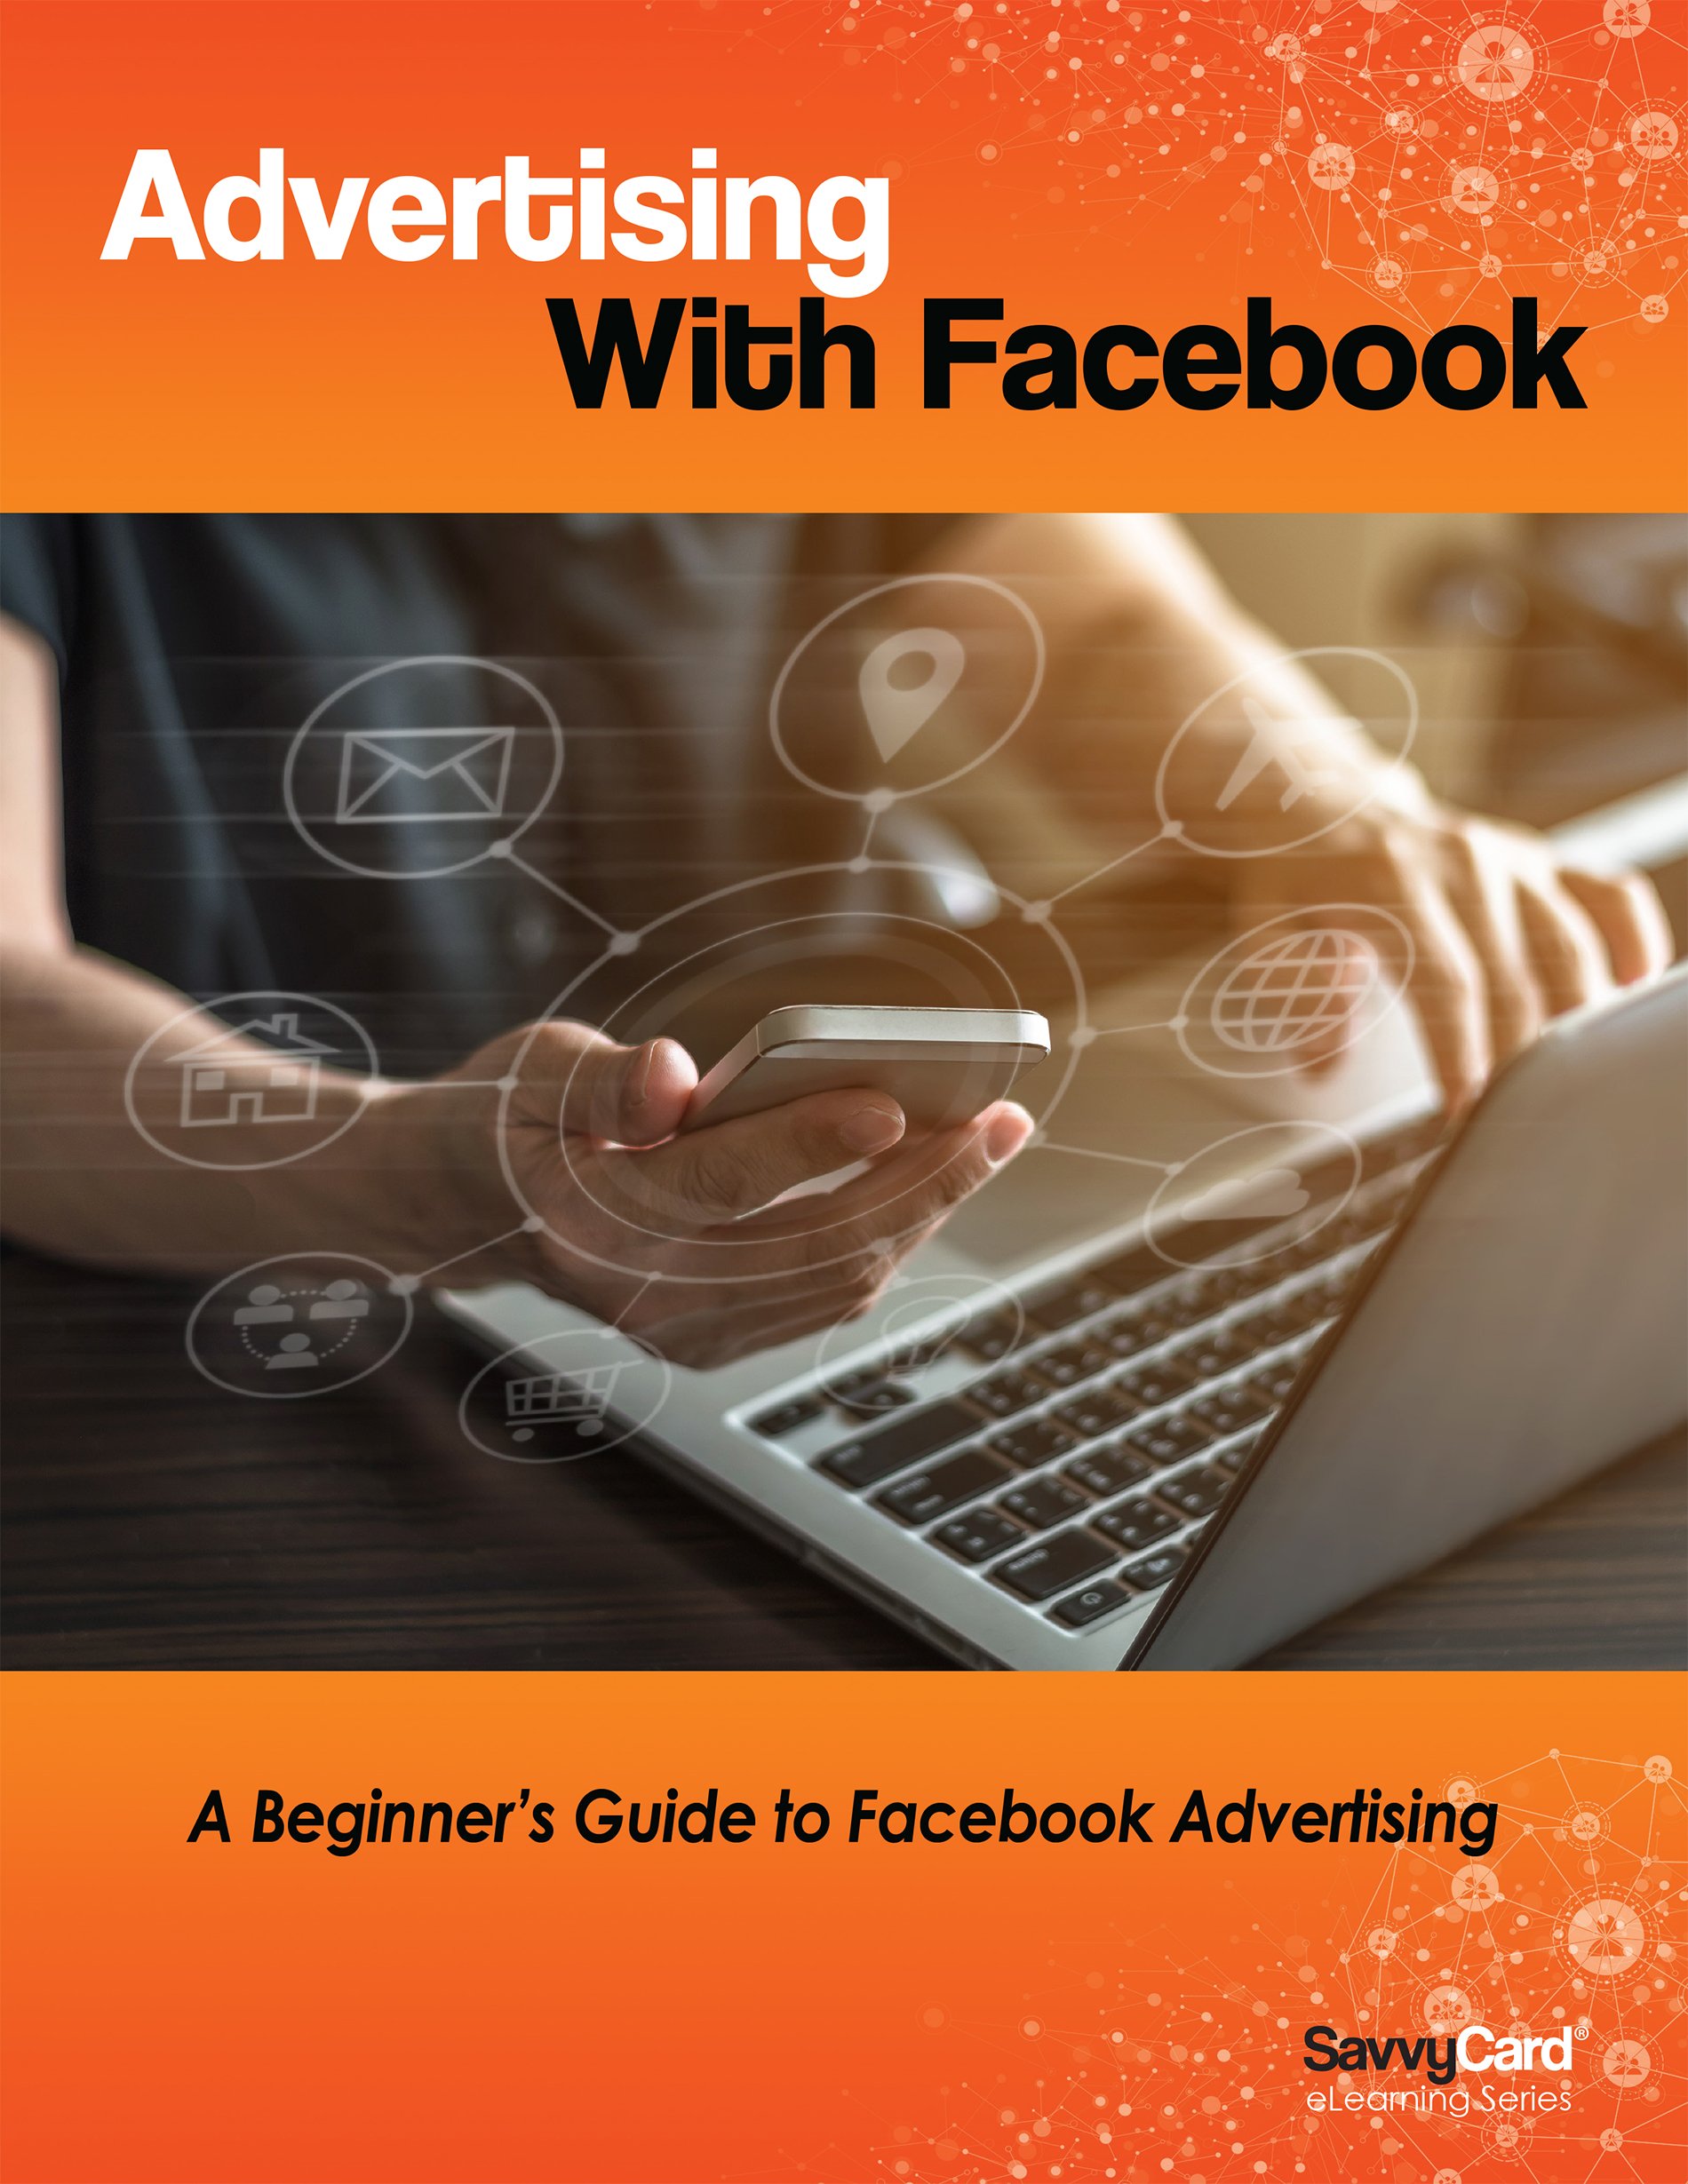 Advertising_With_Facebook_010220_cover_only-1